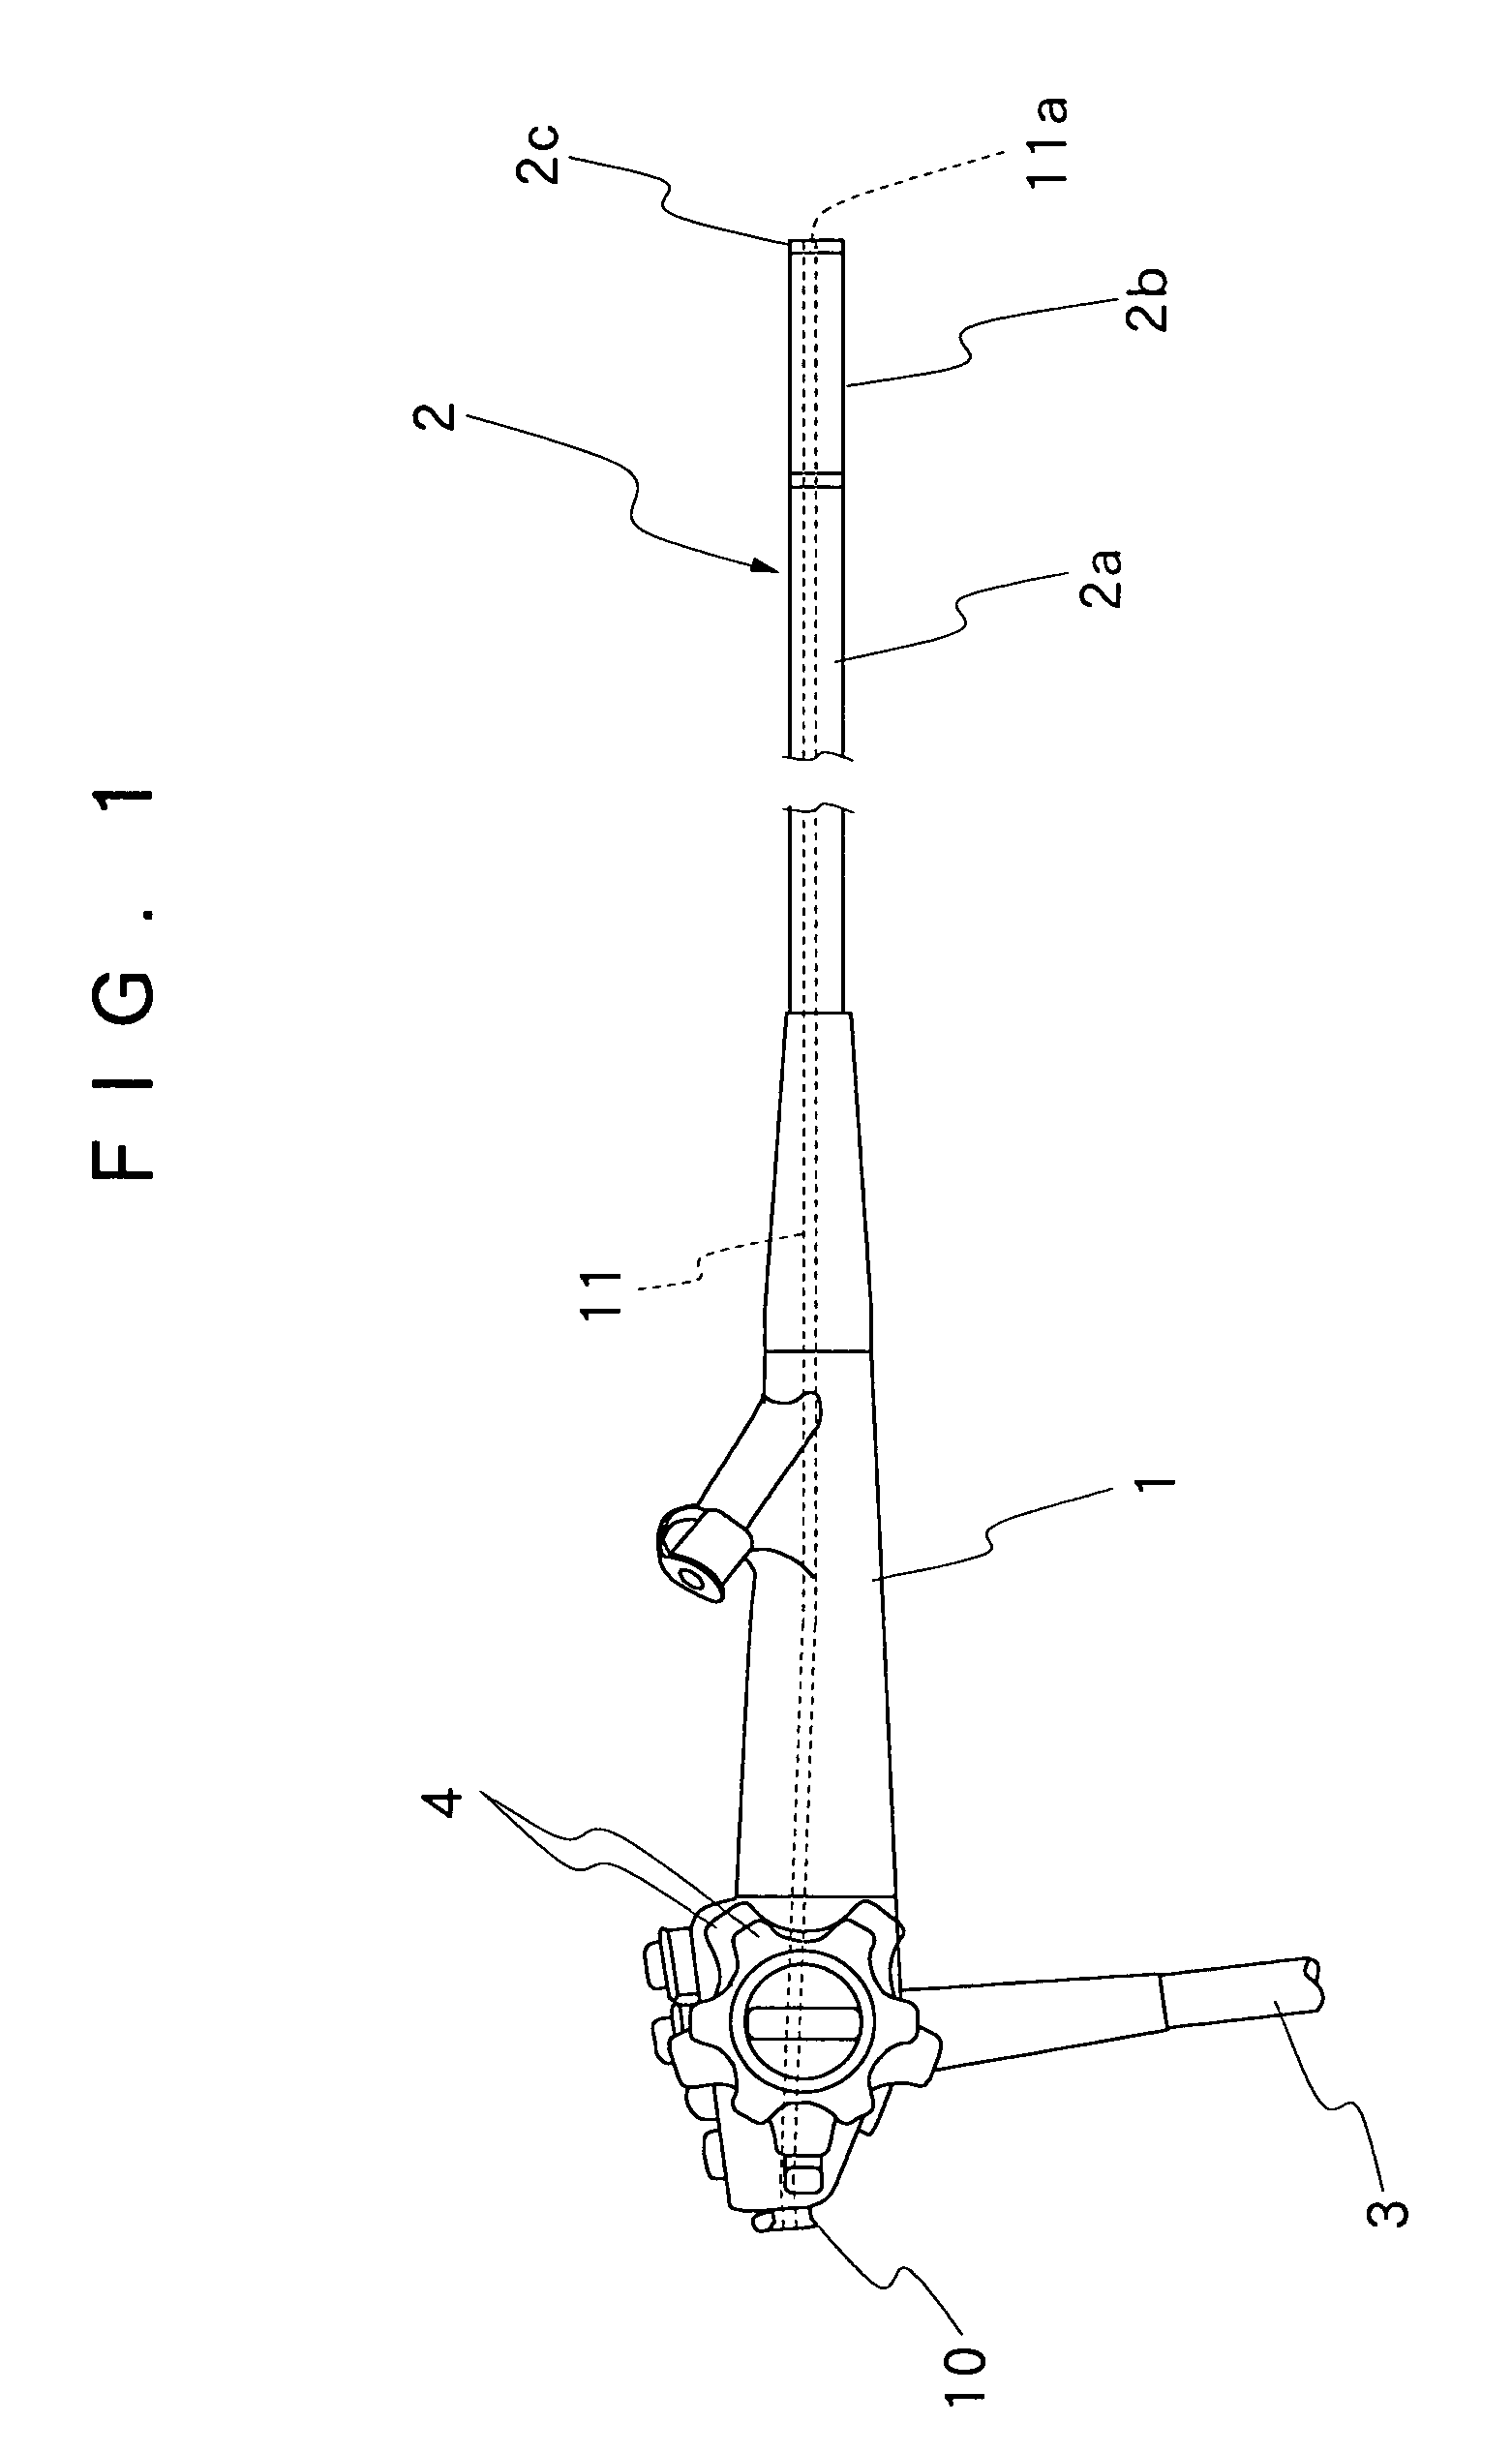 Liquid feed device for use on endoscopes